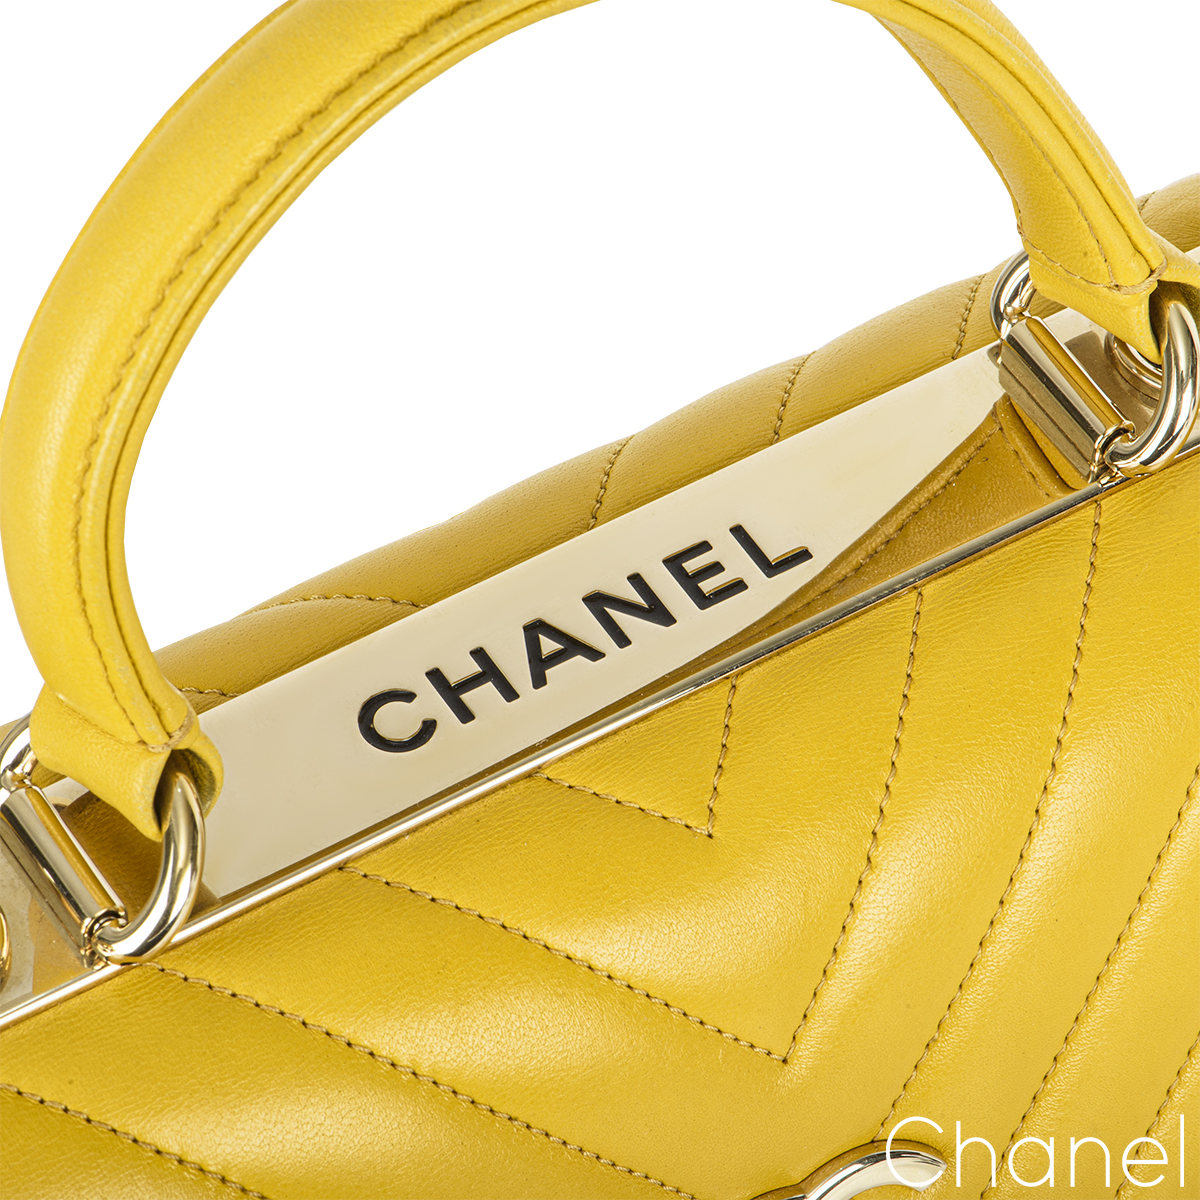 Chanel Coco Luxe Small Flap Bag A57086 Yellow 2018  Chanel clutch bag,  Chanel flap bag, Chanel handbags